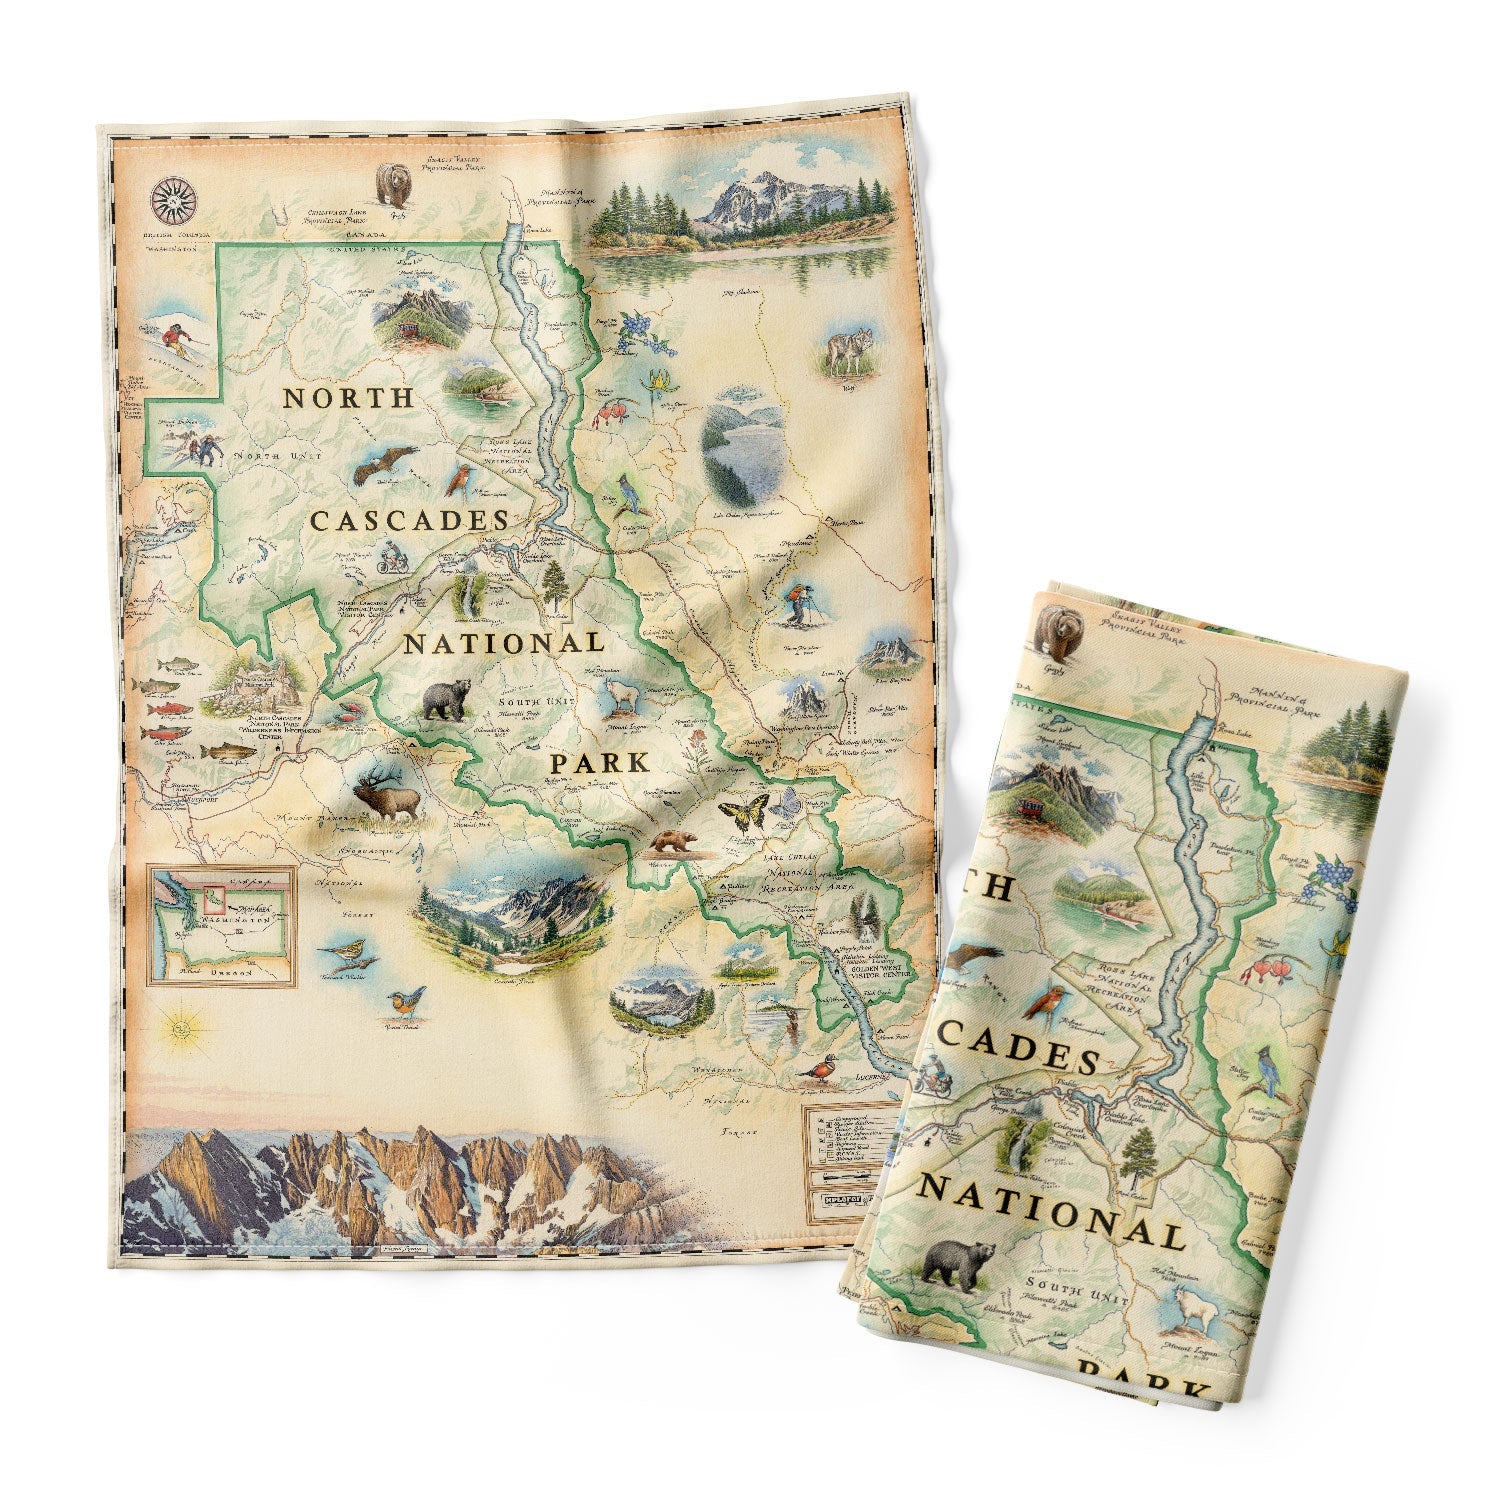 The North Cascades 100% cotton flour-sack dishtowels in earth tones of green and blue. Featuring illustrations of black bear, elk, wolverine, glacier lily, and huckleberries. Other illustrations include Pickett Range, Cascade Pass, and Lake Chelan Recreation area.